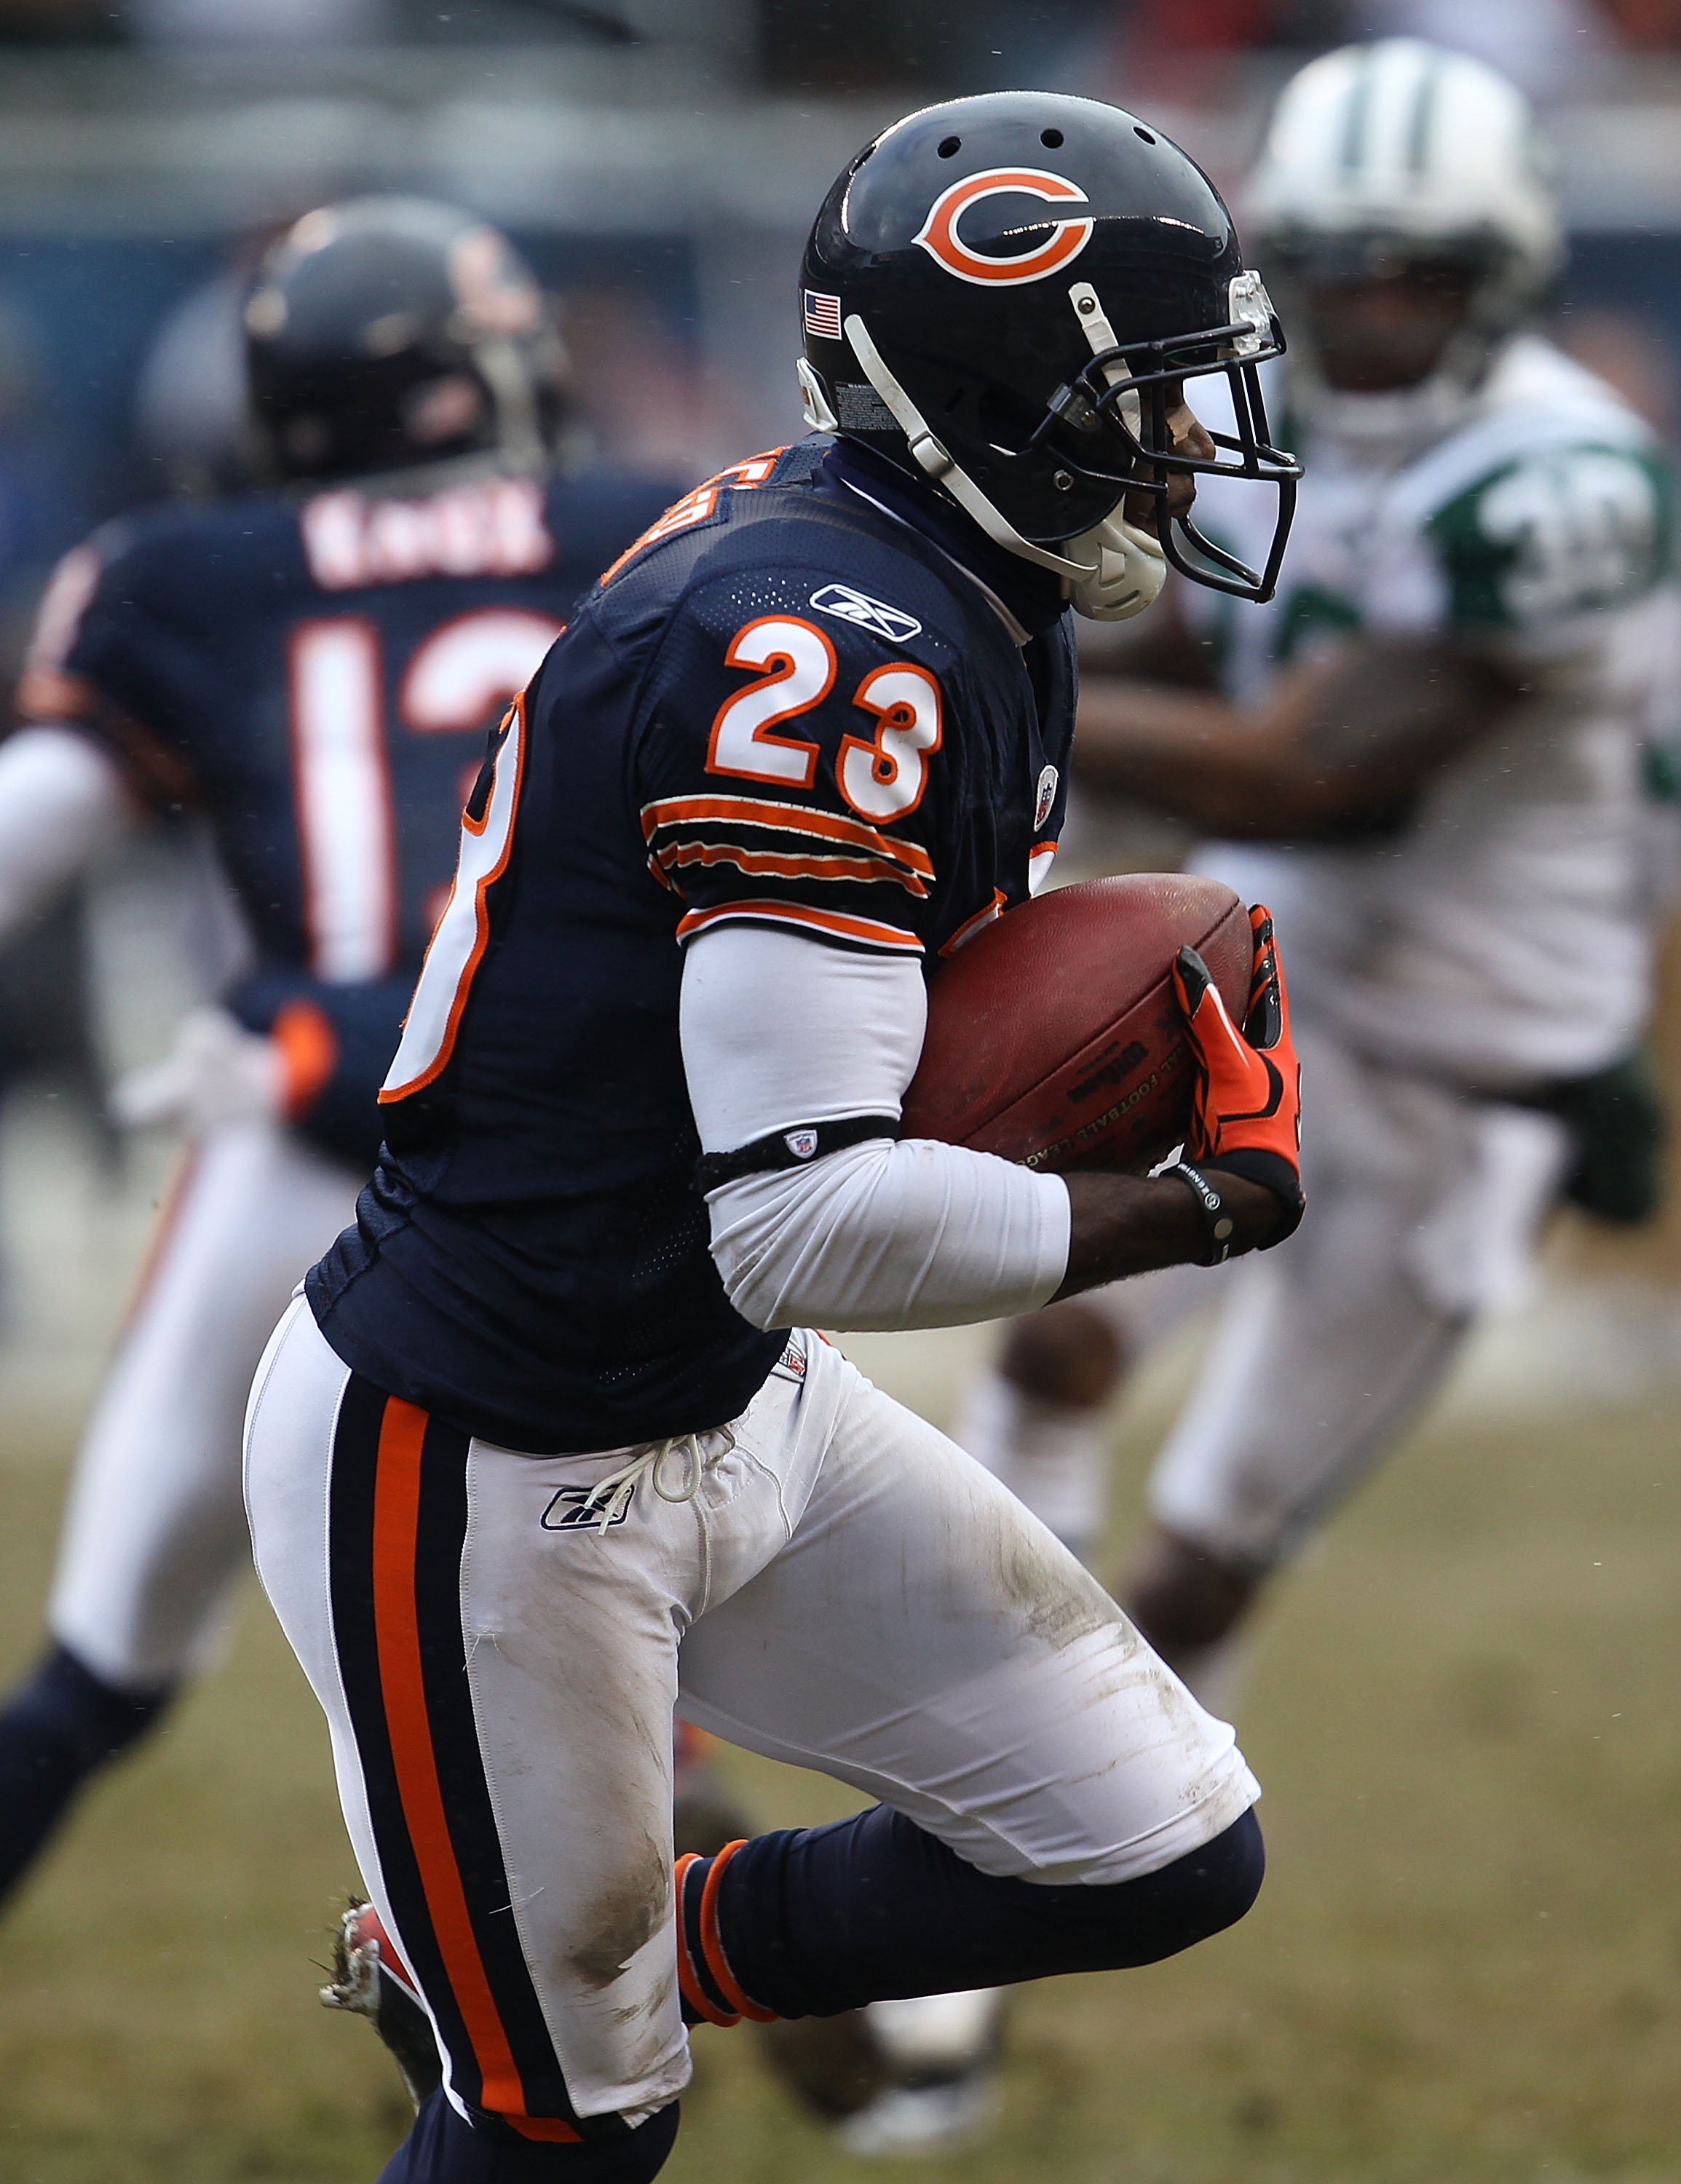 CHICAGO, IL - DECEMBER 26: Devin Hester #23 of the Chicago Bears runs against the New York Jets at Soldier Field on December 26, 2010 in Chicago, Illinois. The Bears defeated the Jets 38-34. (Photo by Jonathan Daniel/Getty Images)